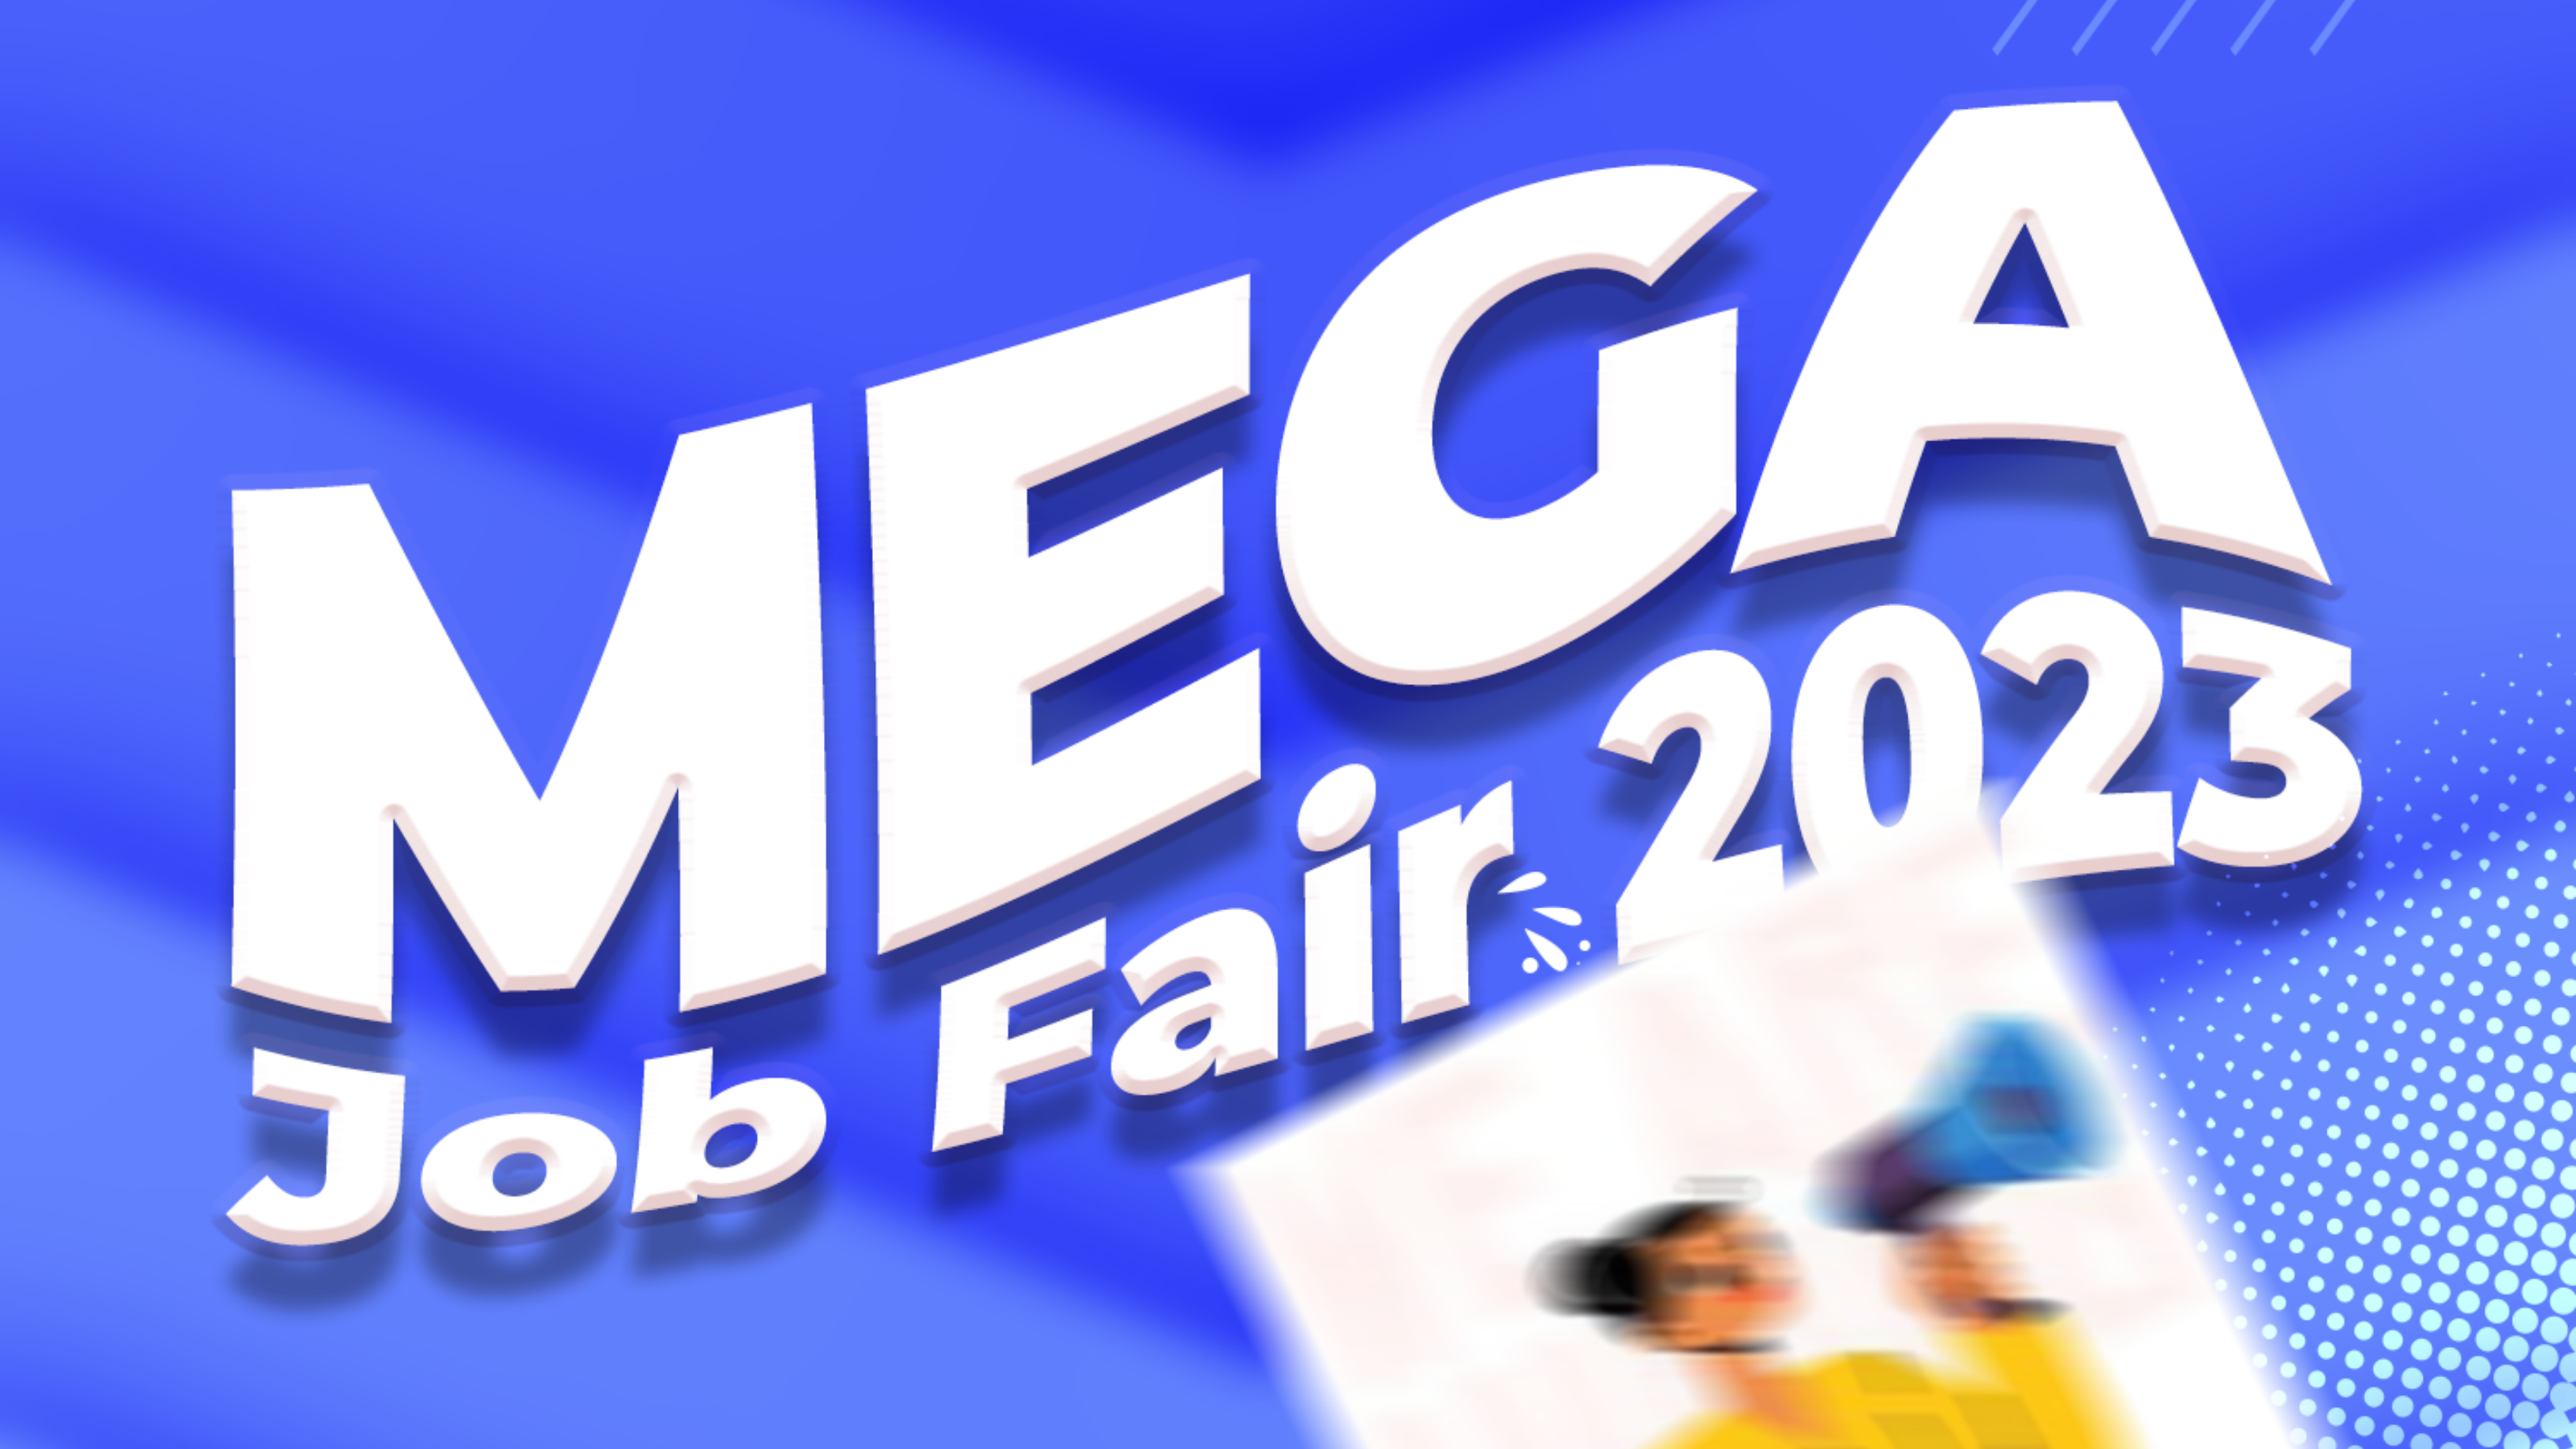 MEGA Job Fair 2023 Post free event in Nigeria using tickethub.ng, buy and sell tickets to event